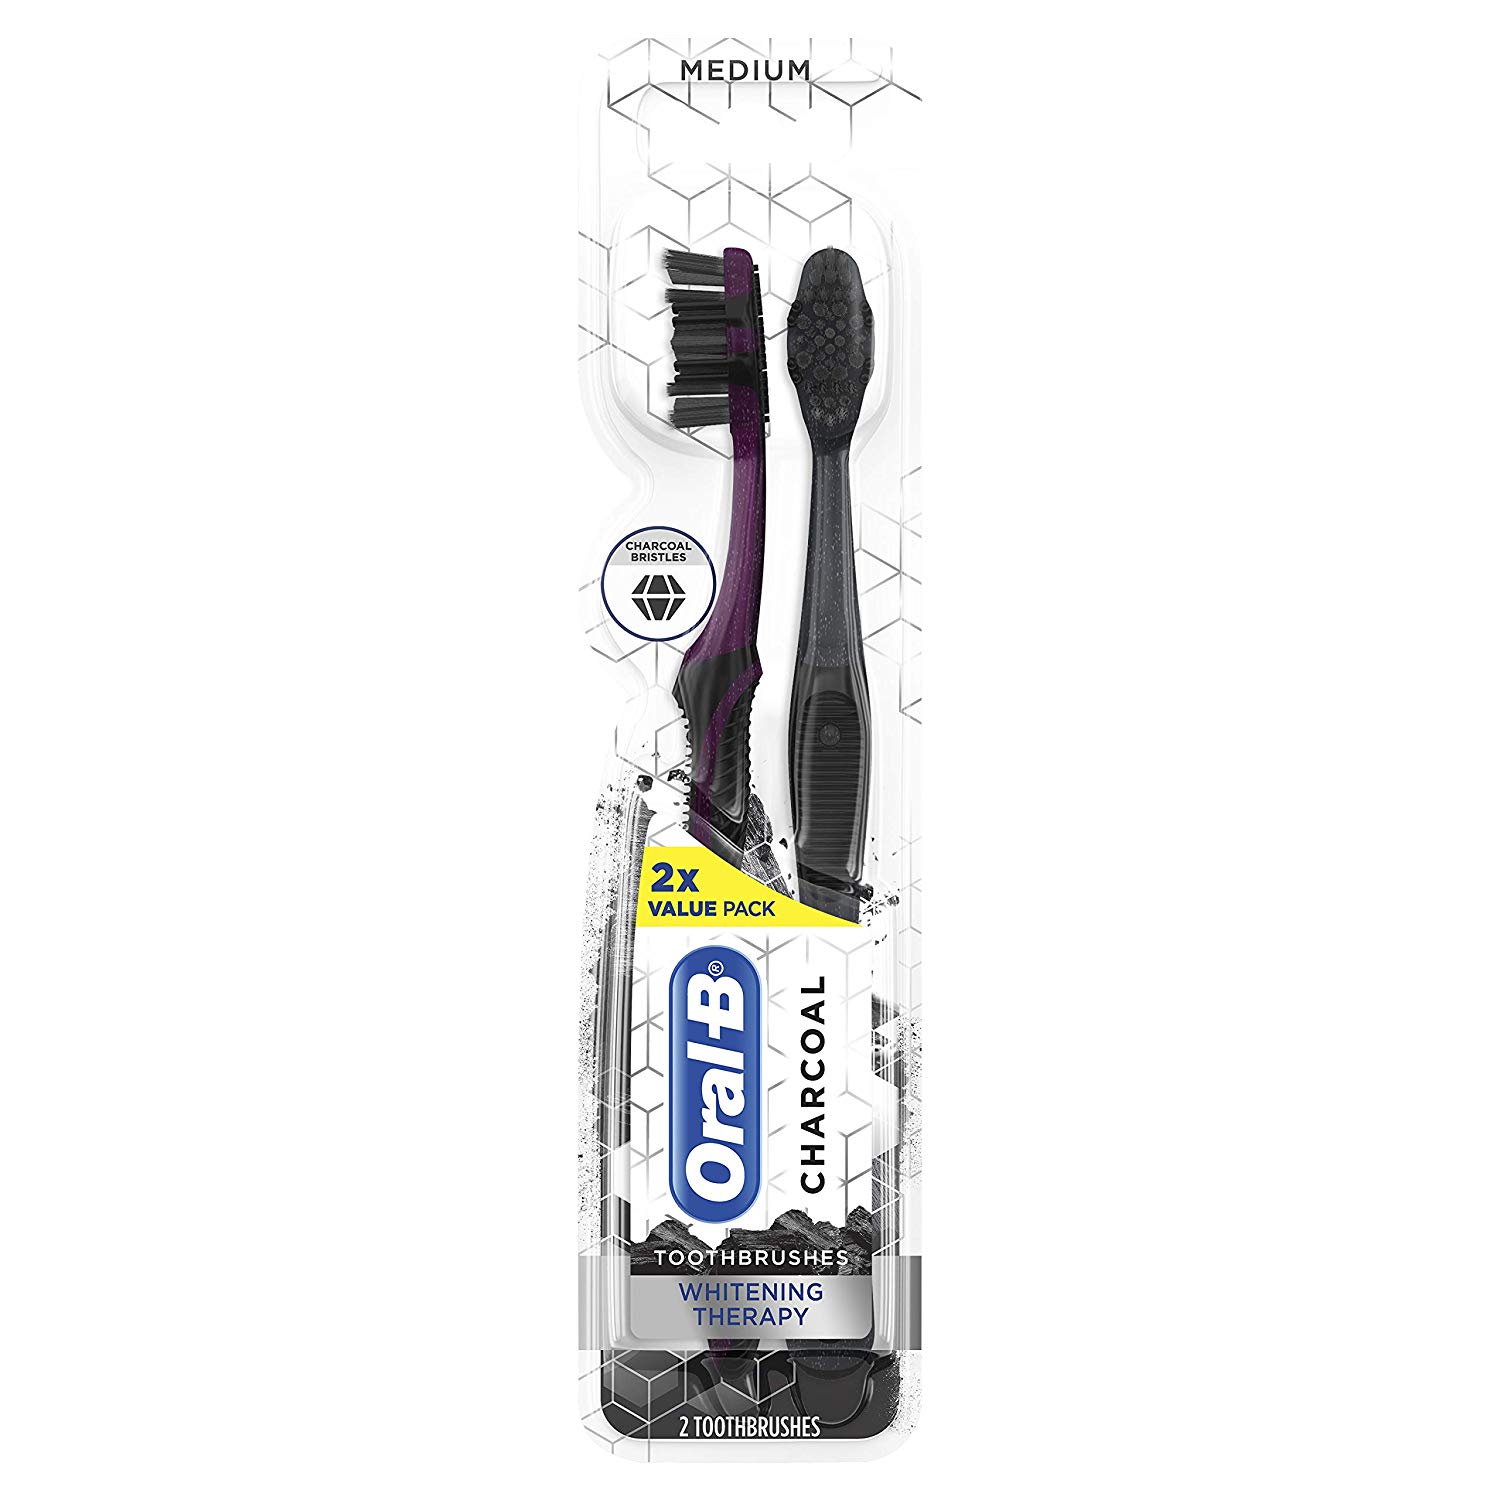 Oral-b Charcoal Whitening Therapy Toothbrush